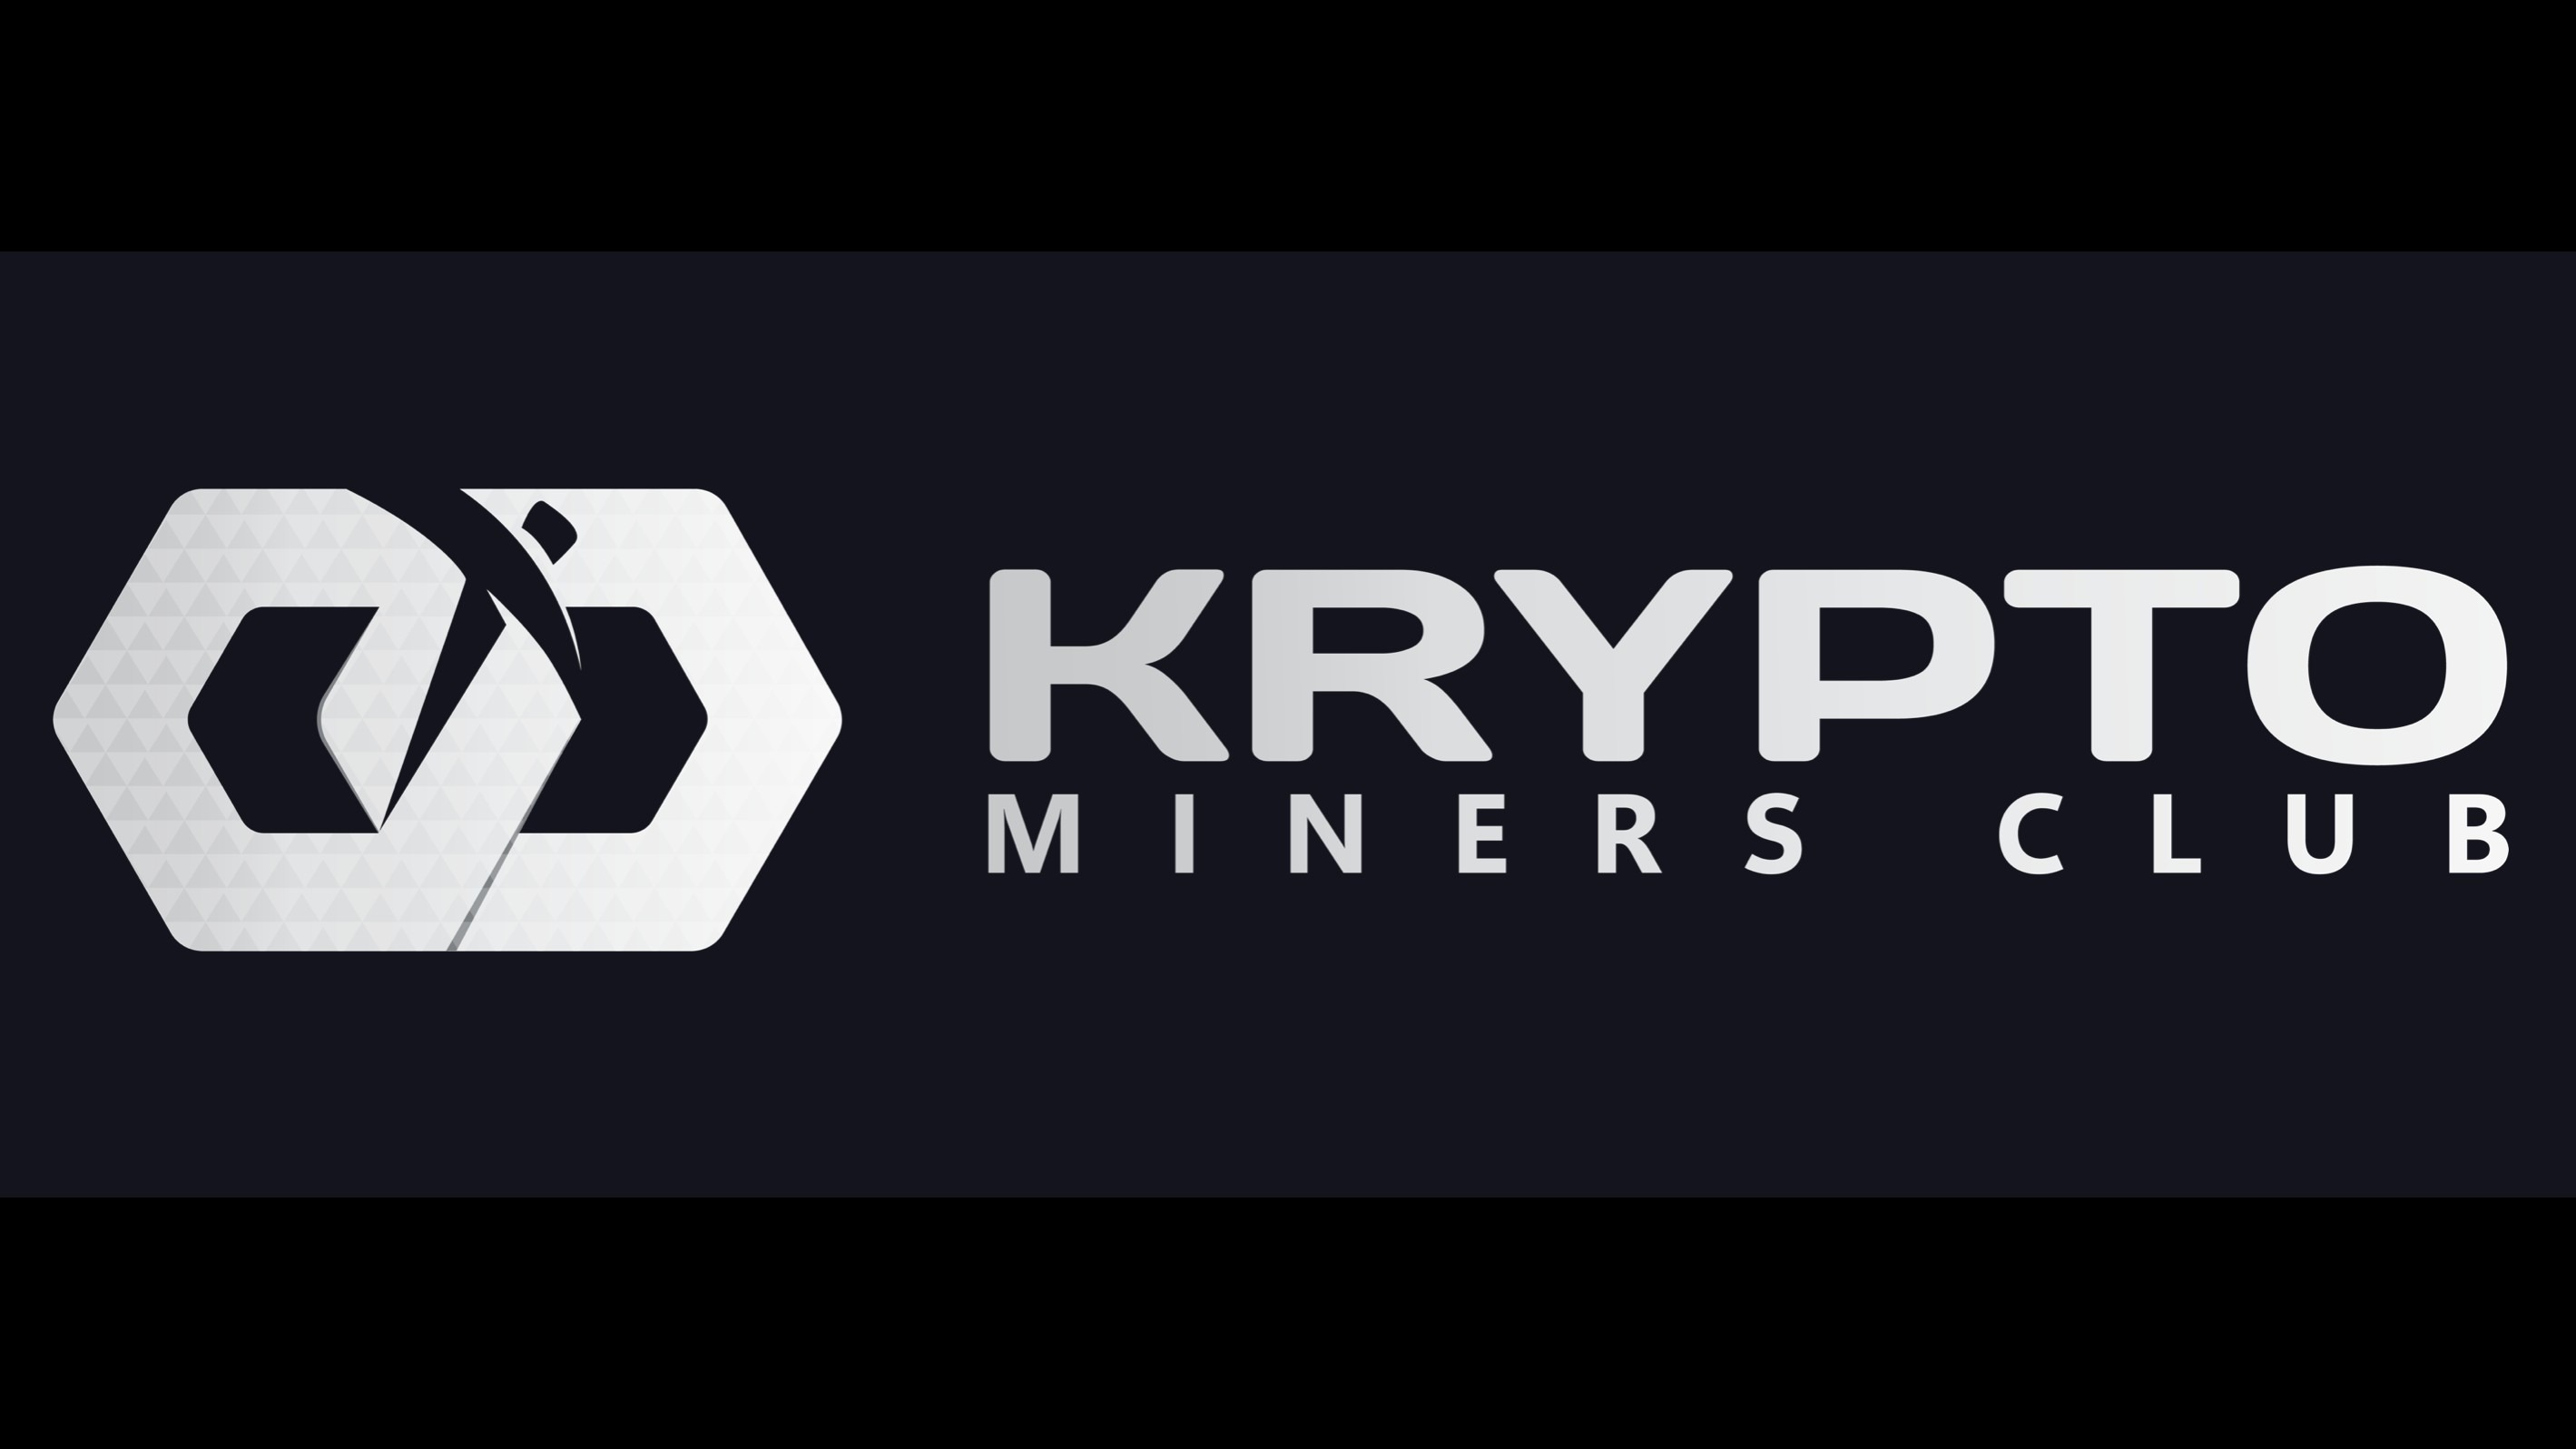 Krypto Mining Club (KMC) announces release of their NFTs on Polygon.